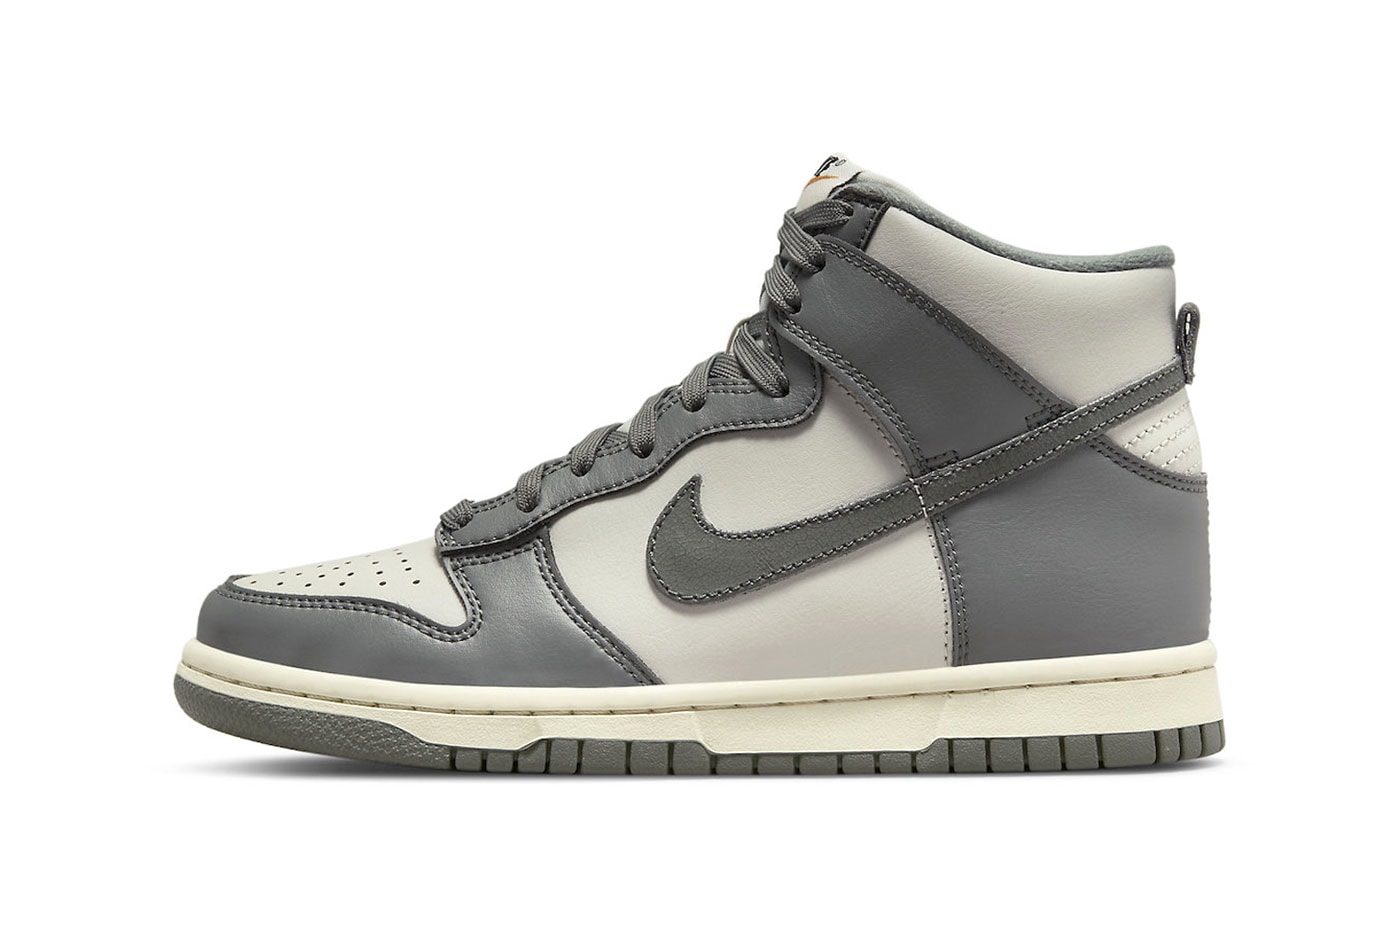 Official Images of Nike Dunk High in Dual Grey Tones DM1028-001 spring summer 2022 ss22 retro sail swoosh laces sneakers